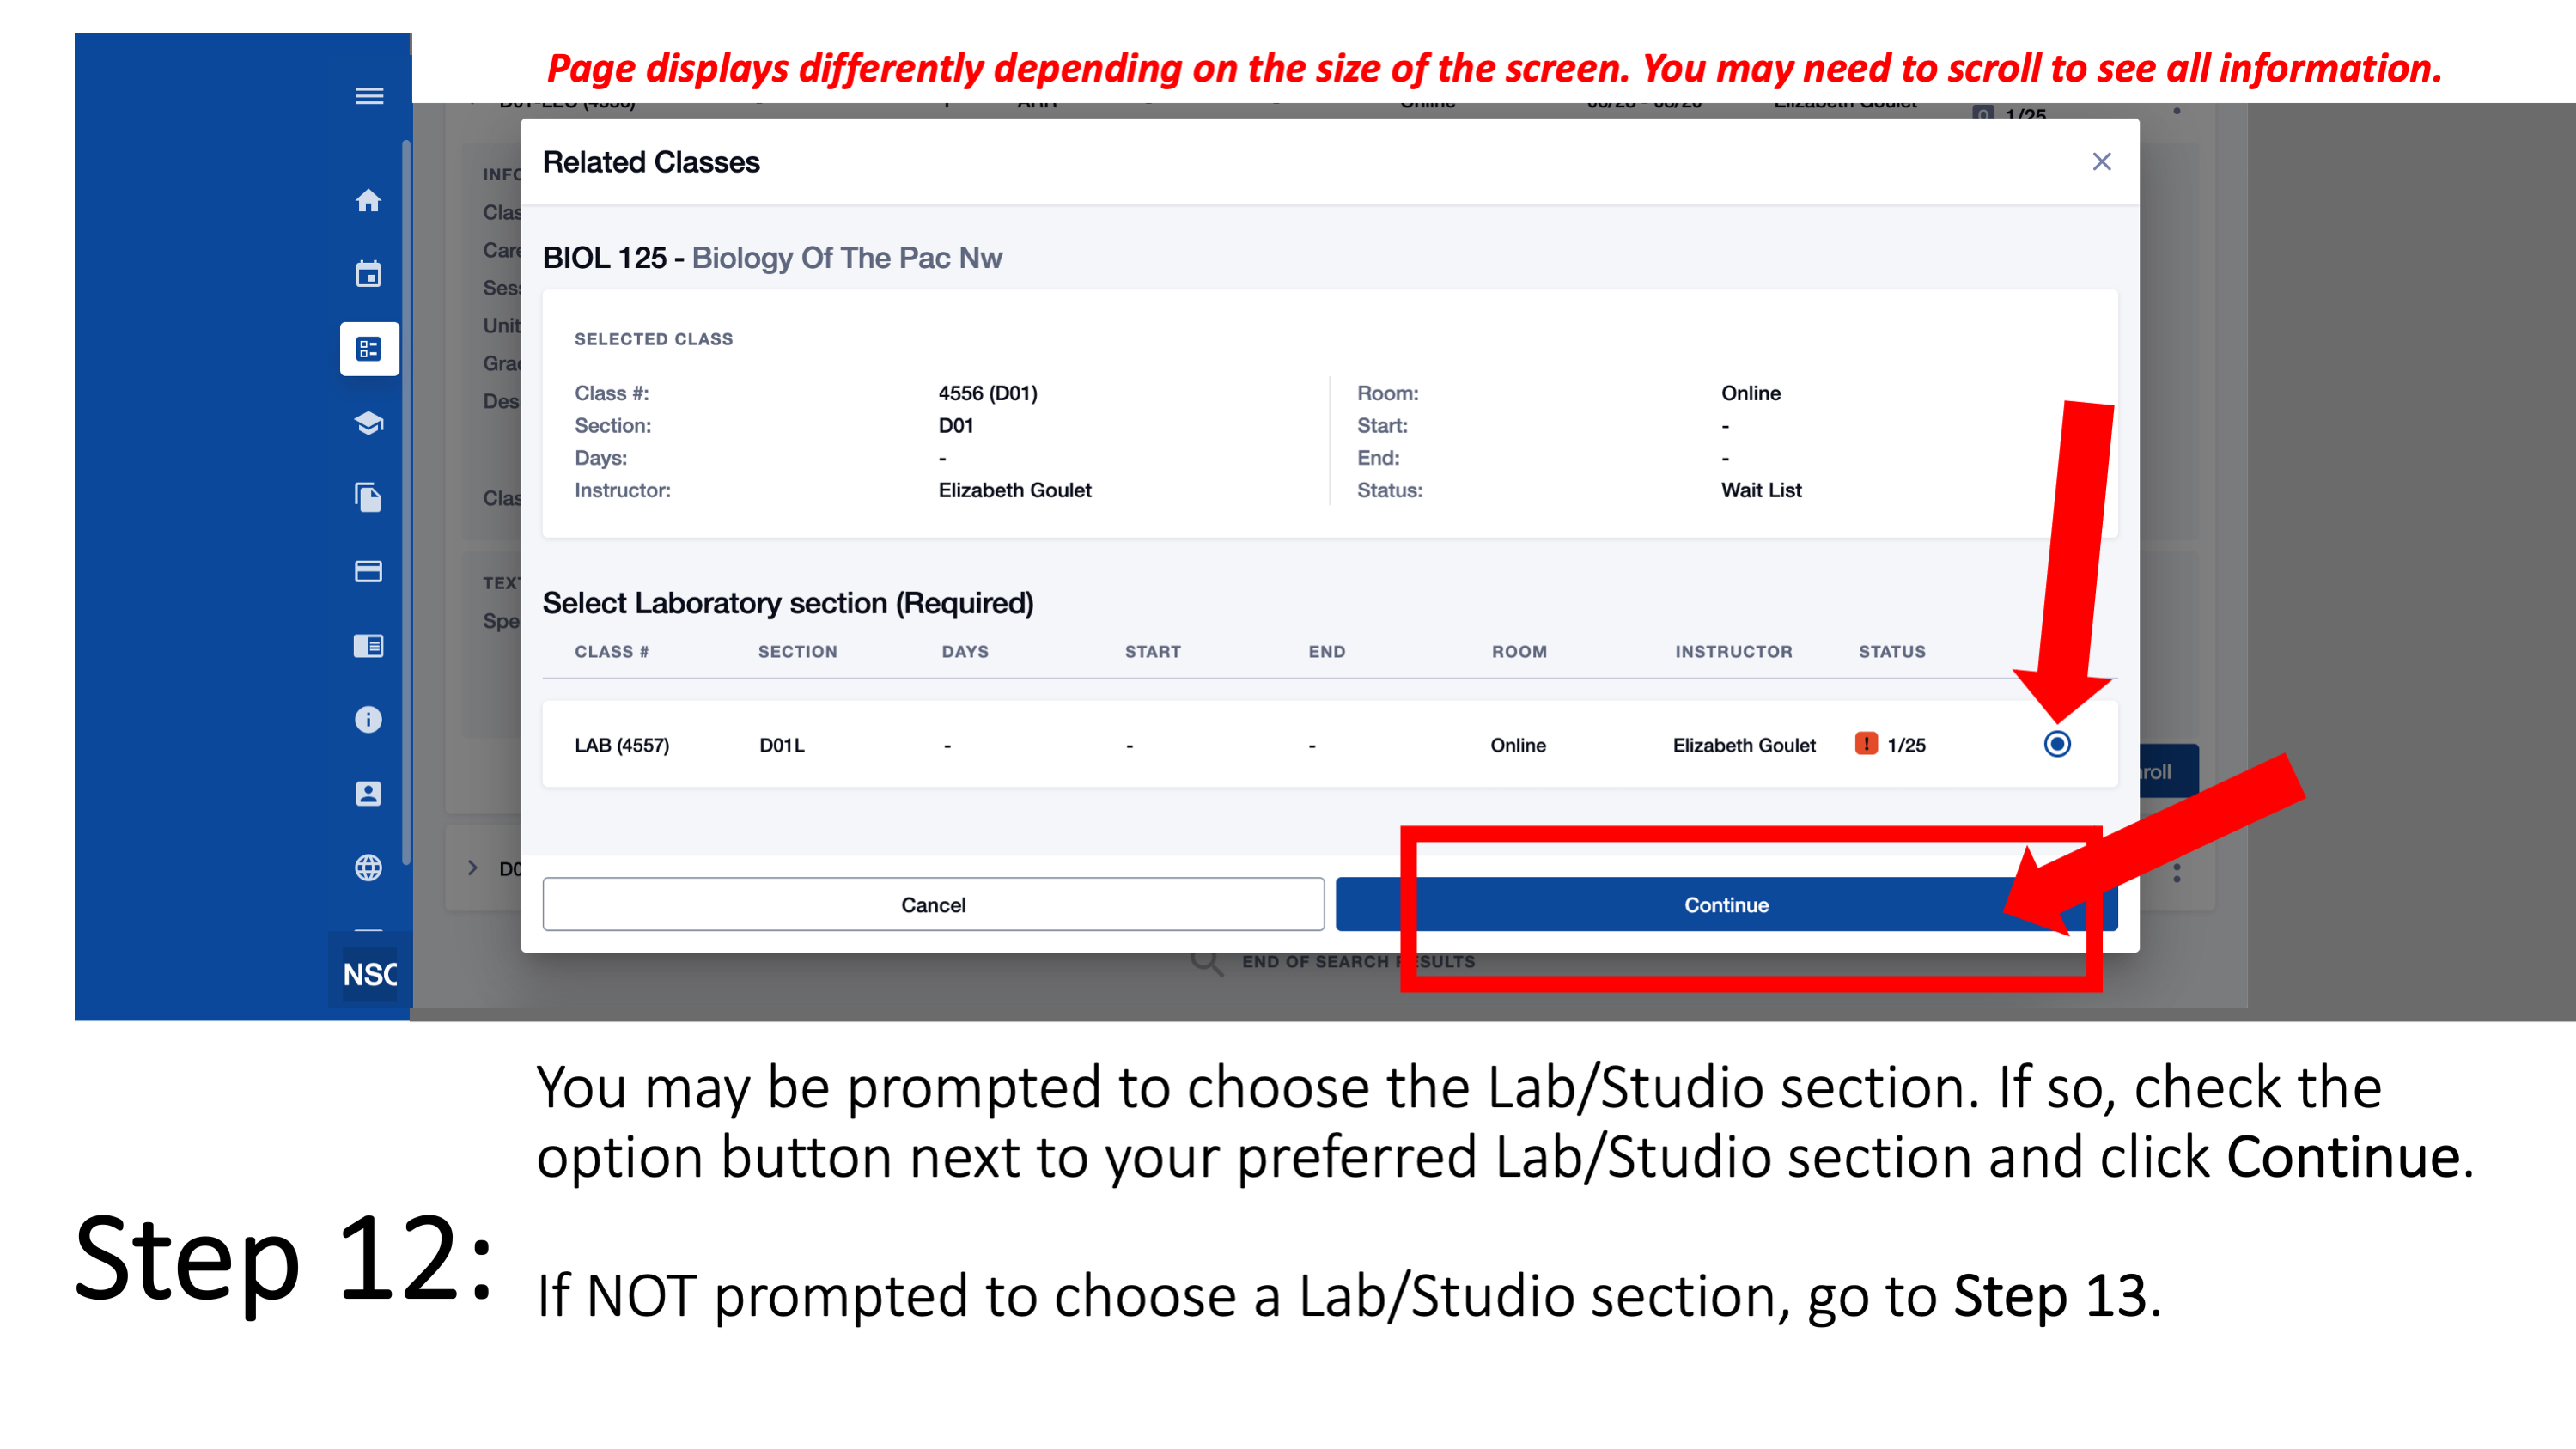 Step 12: You may be prompted to choose the Lab/Studio section. If so, check the option button next to your preferred Lab/Studio section and click Continue. If NOT prompted to choose a Lab/Studio section, go to Step 13. Page displays differently depending on the size of the screen. You may need to scroll to see all information.